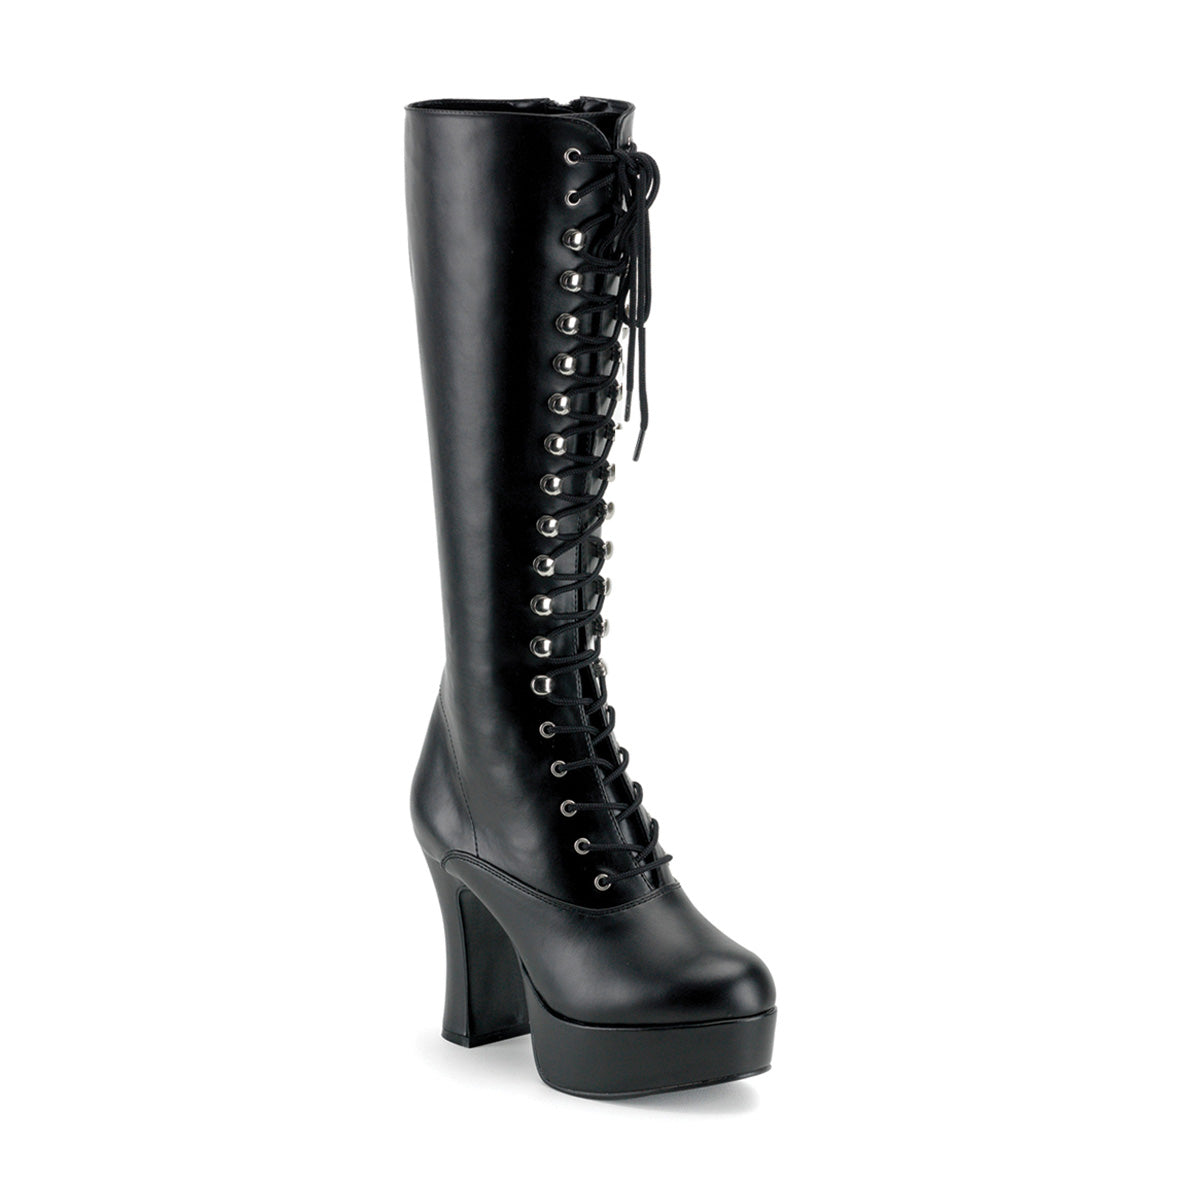 EXOTICA-2020 Black Knee High Boots